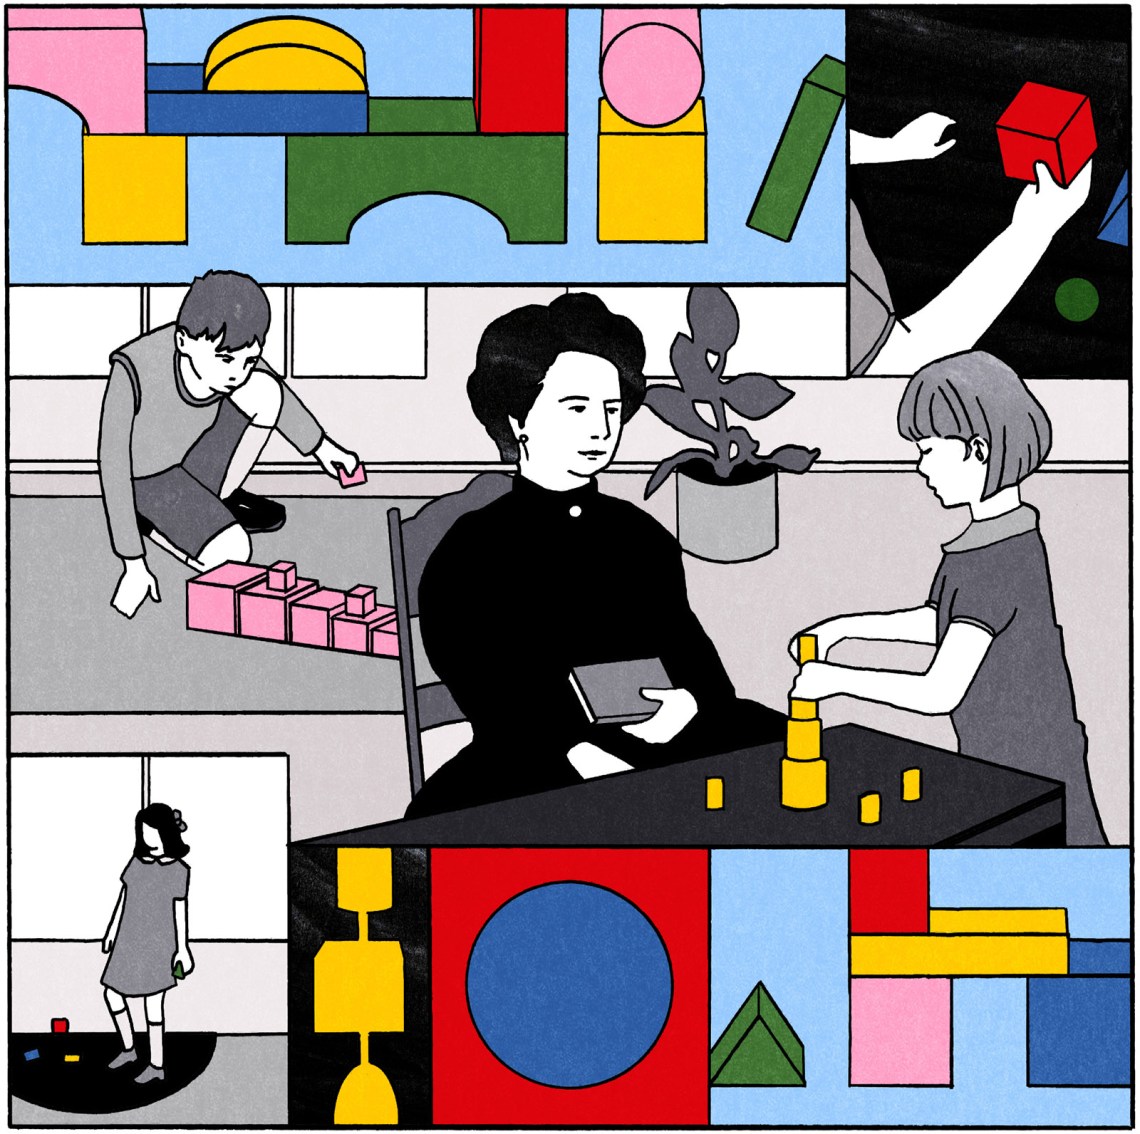 Illustration of Maria Montessori in the classroom with children playing